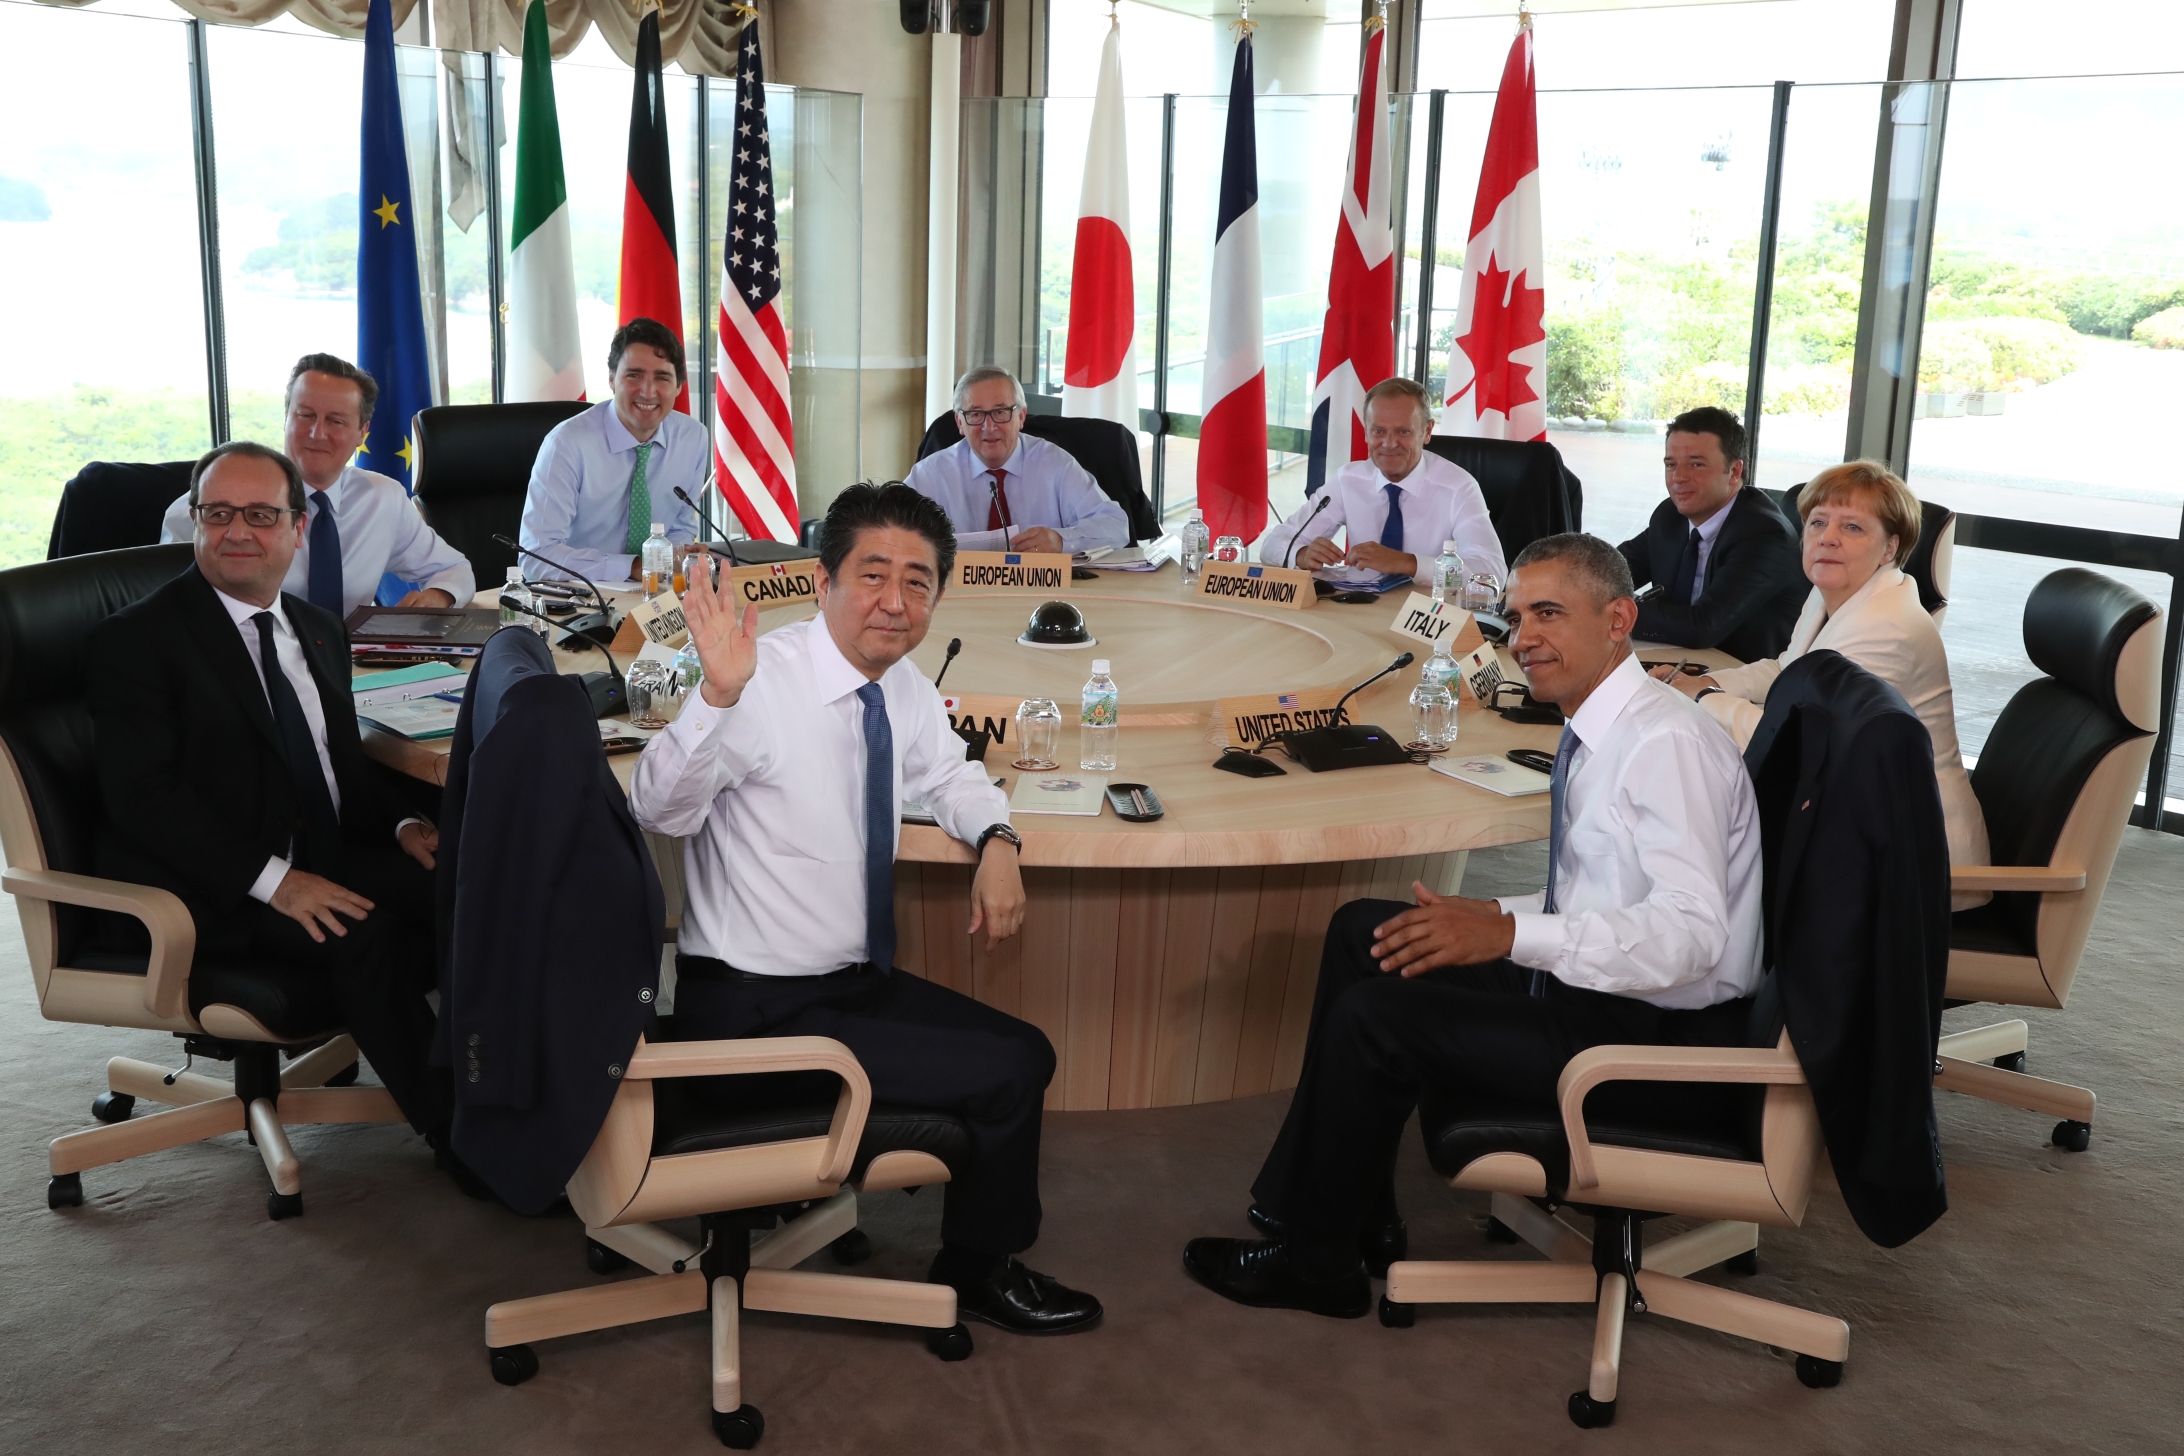 Leaders of the Group of Seven (G-7)